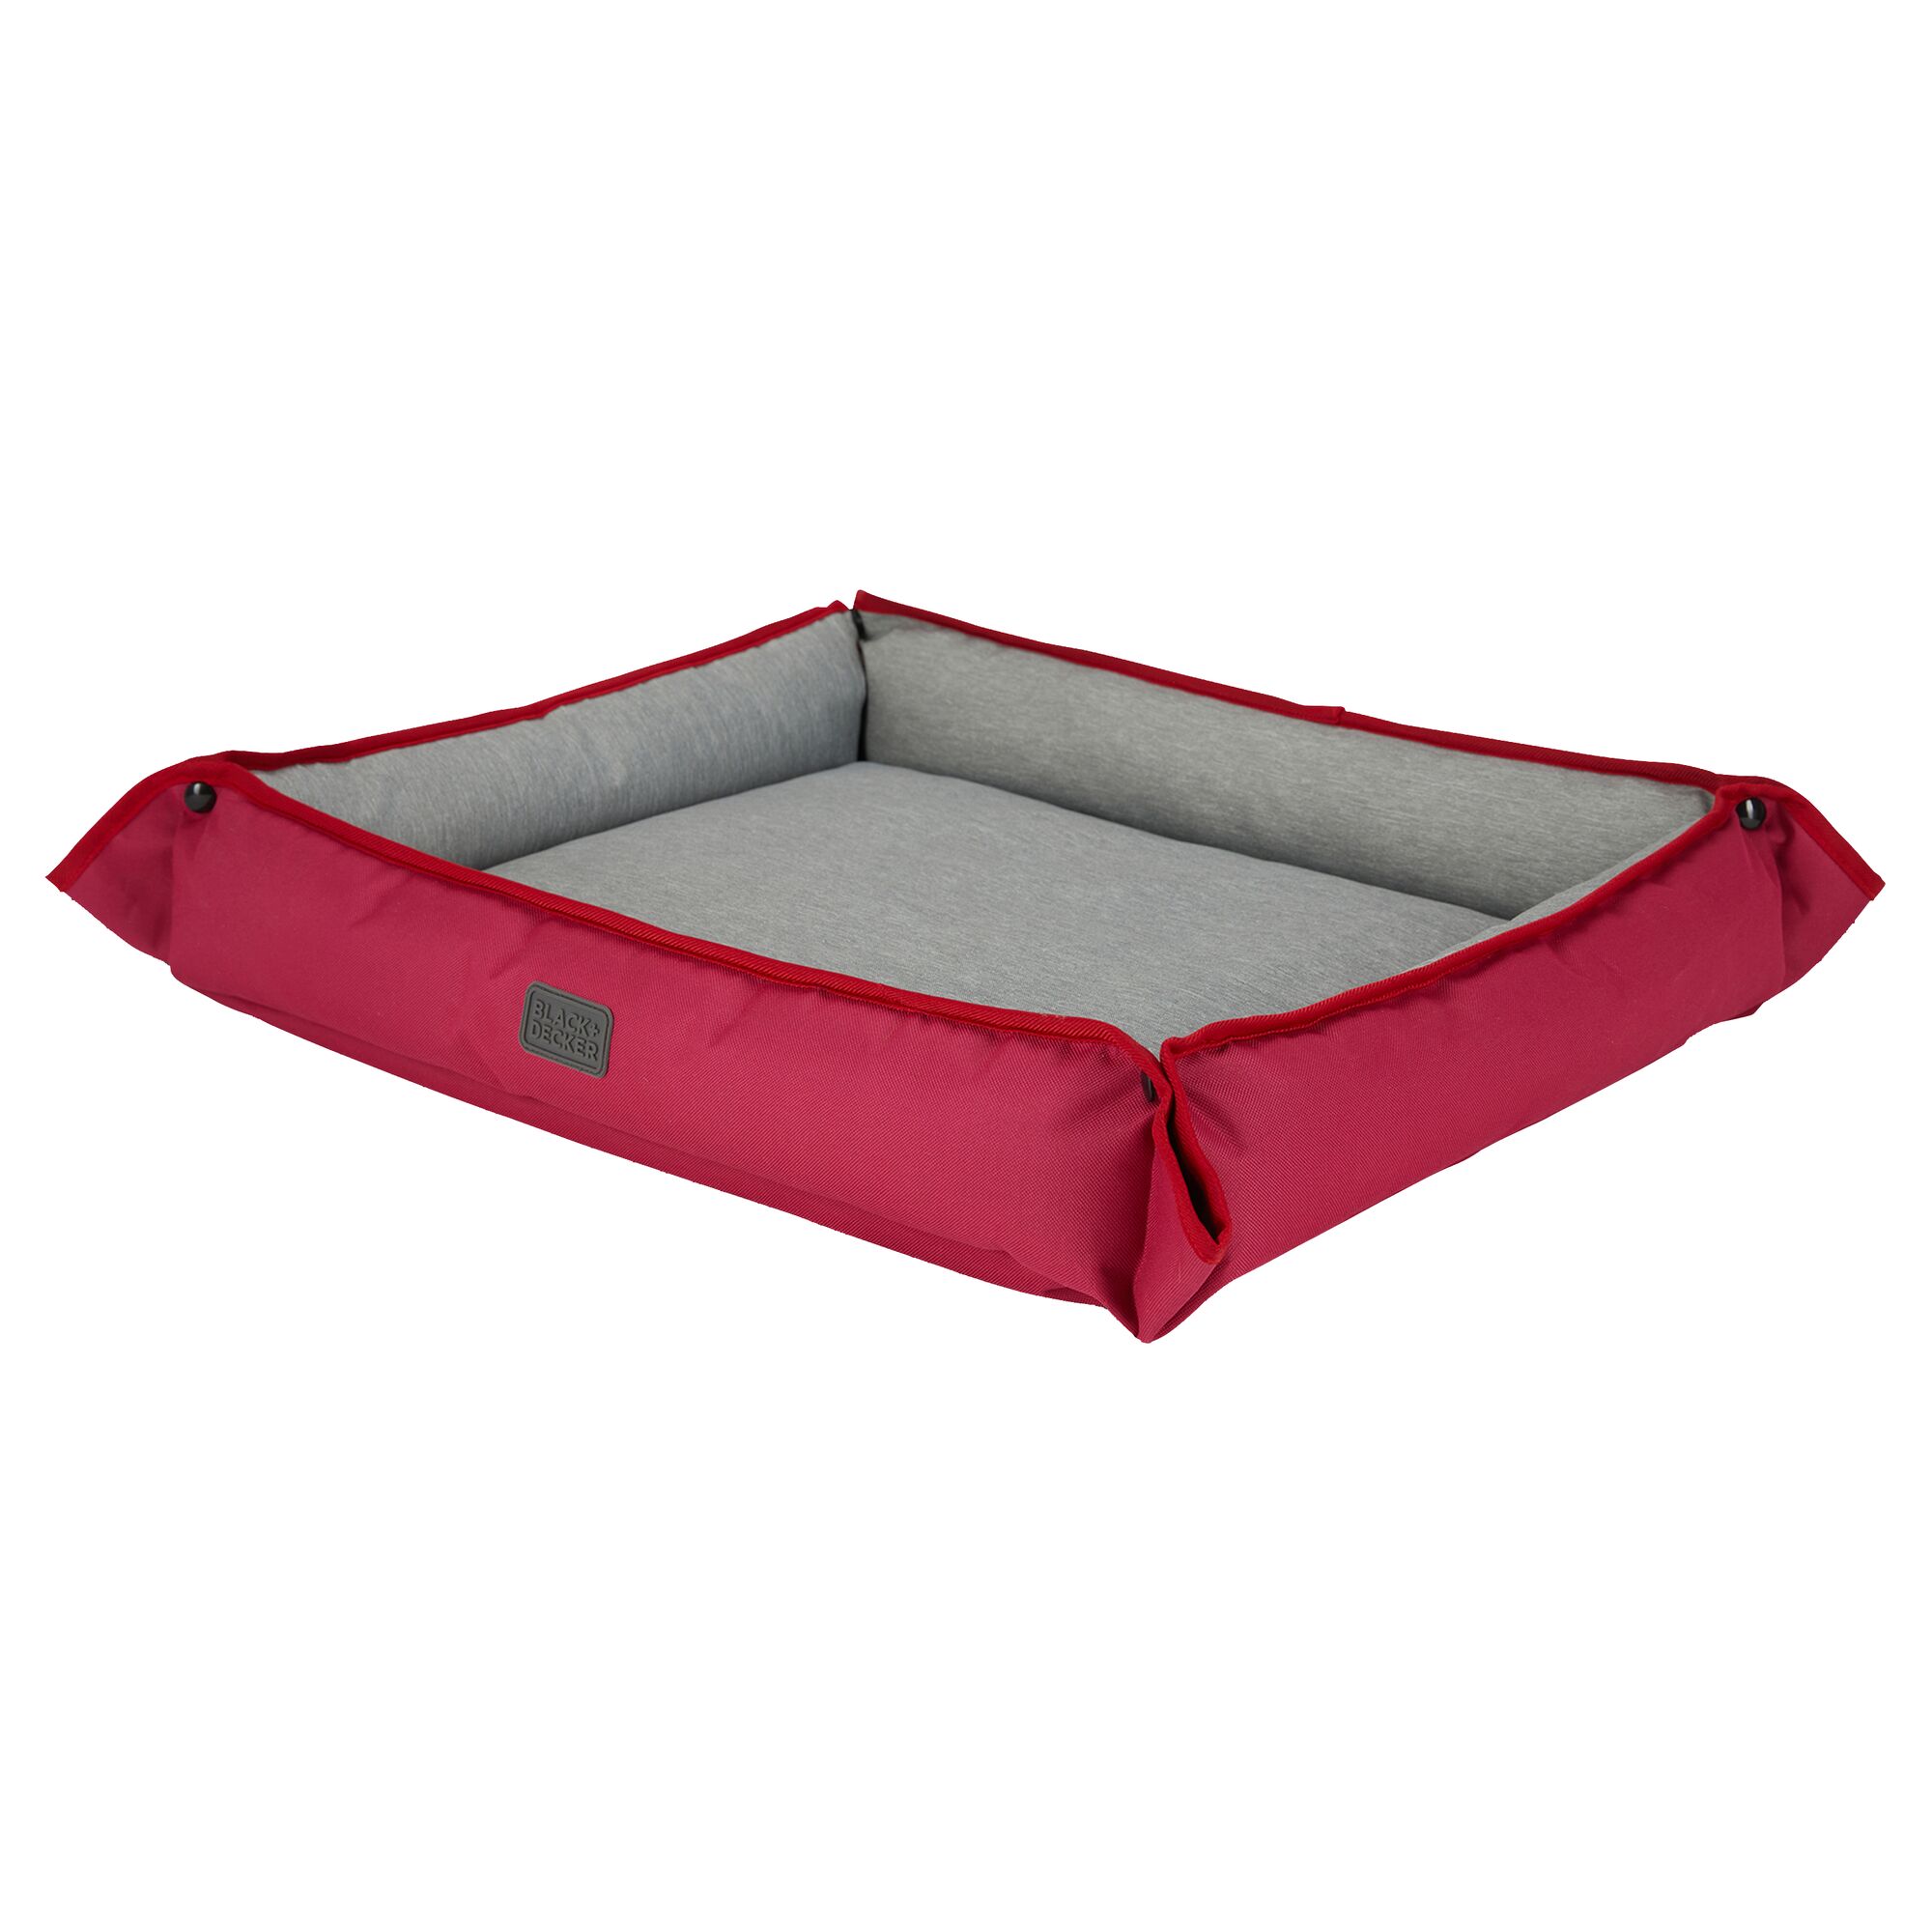 Angled view of the BLACK+DECKER four sided plush pet bed